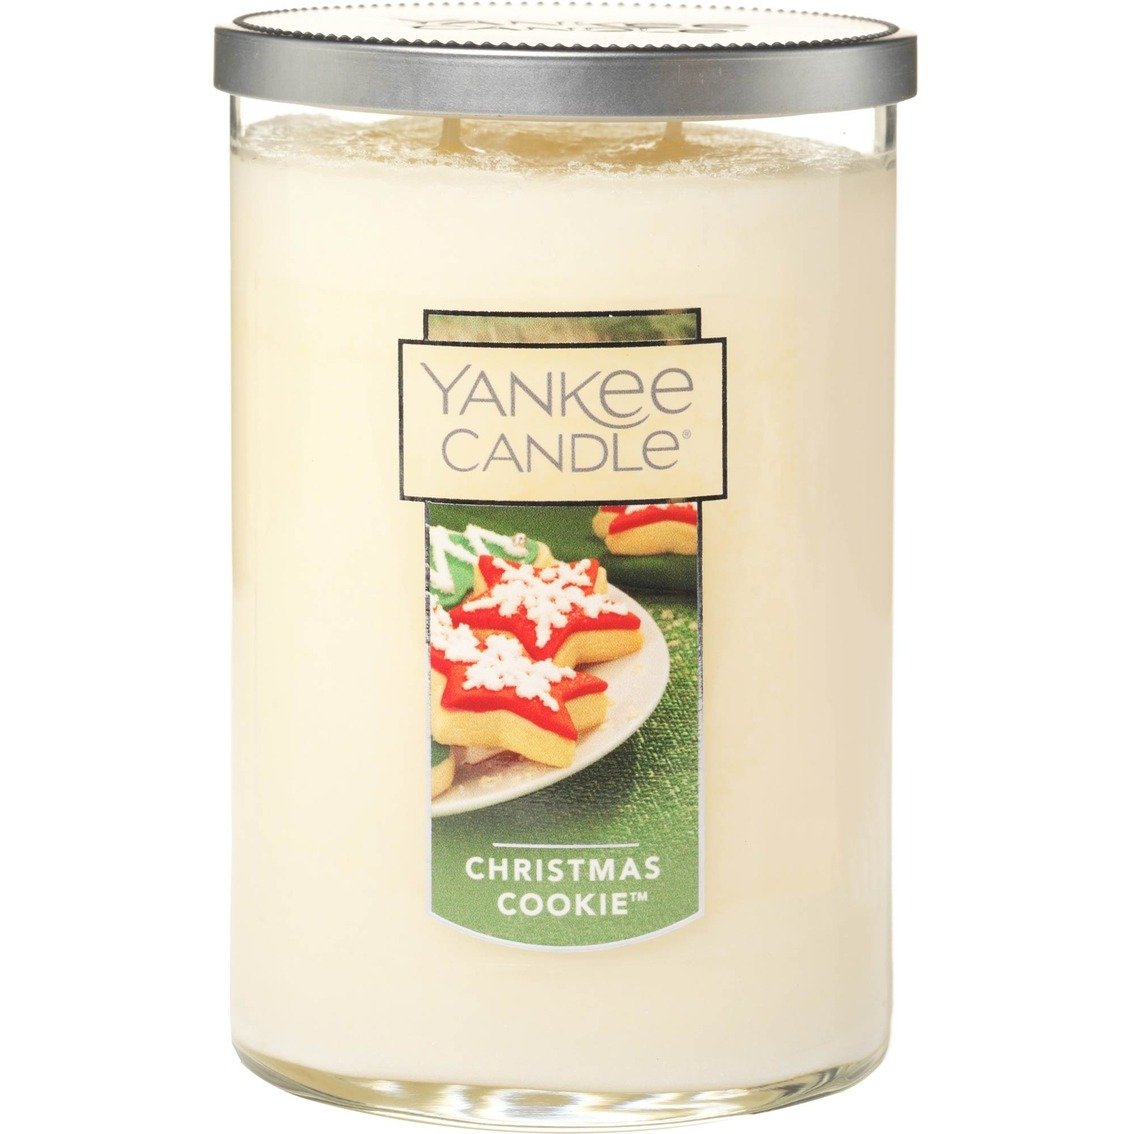 Yankee Candle Christmas Cookie Large 2 Wick Tumbler Candle